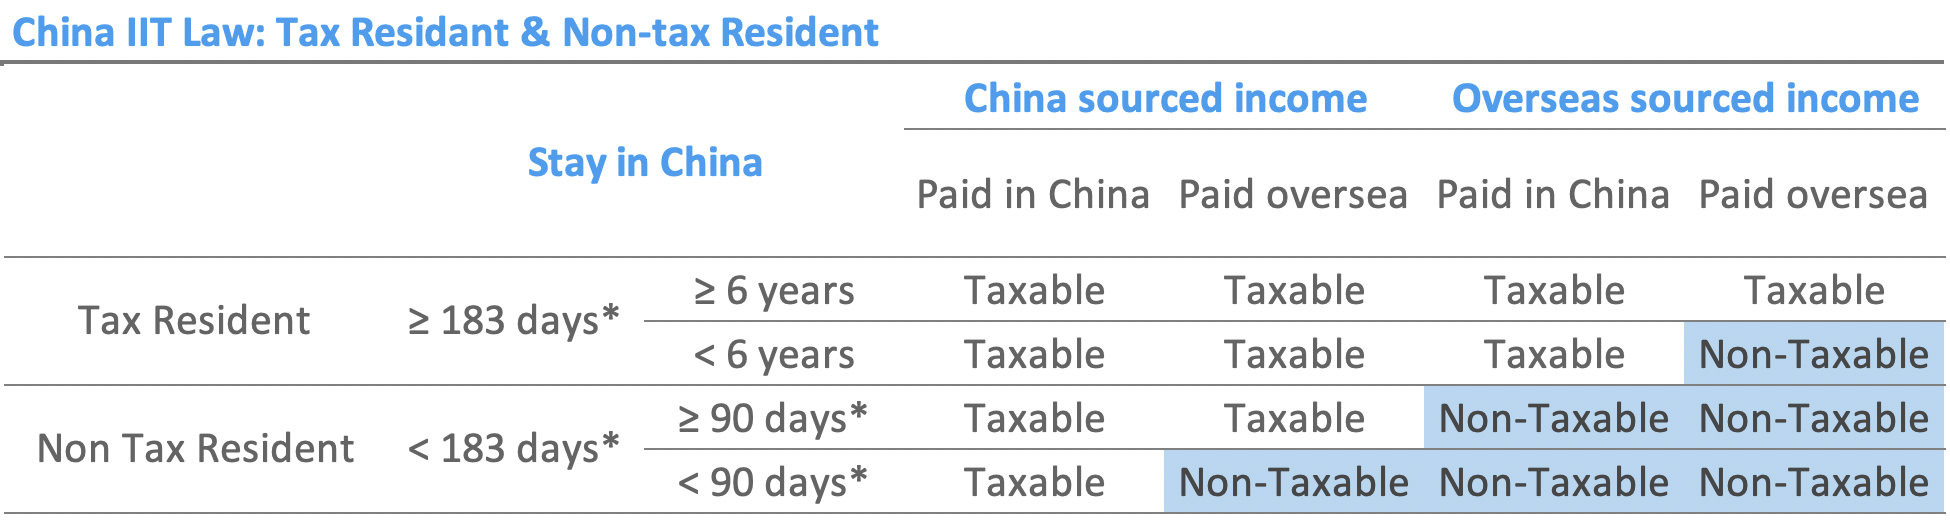 china new iit law january 1 2019 tax resident 6 year rule 5 year rule